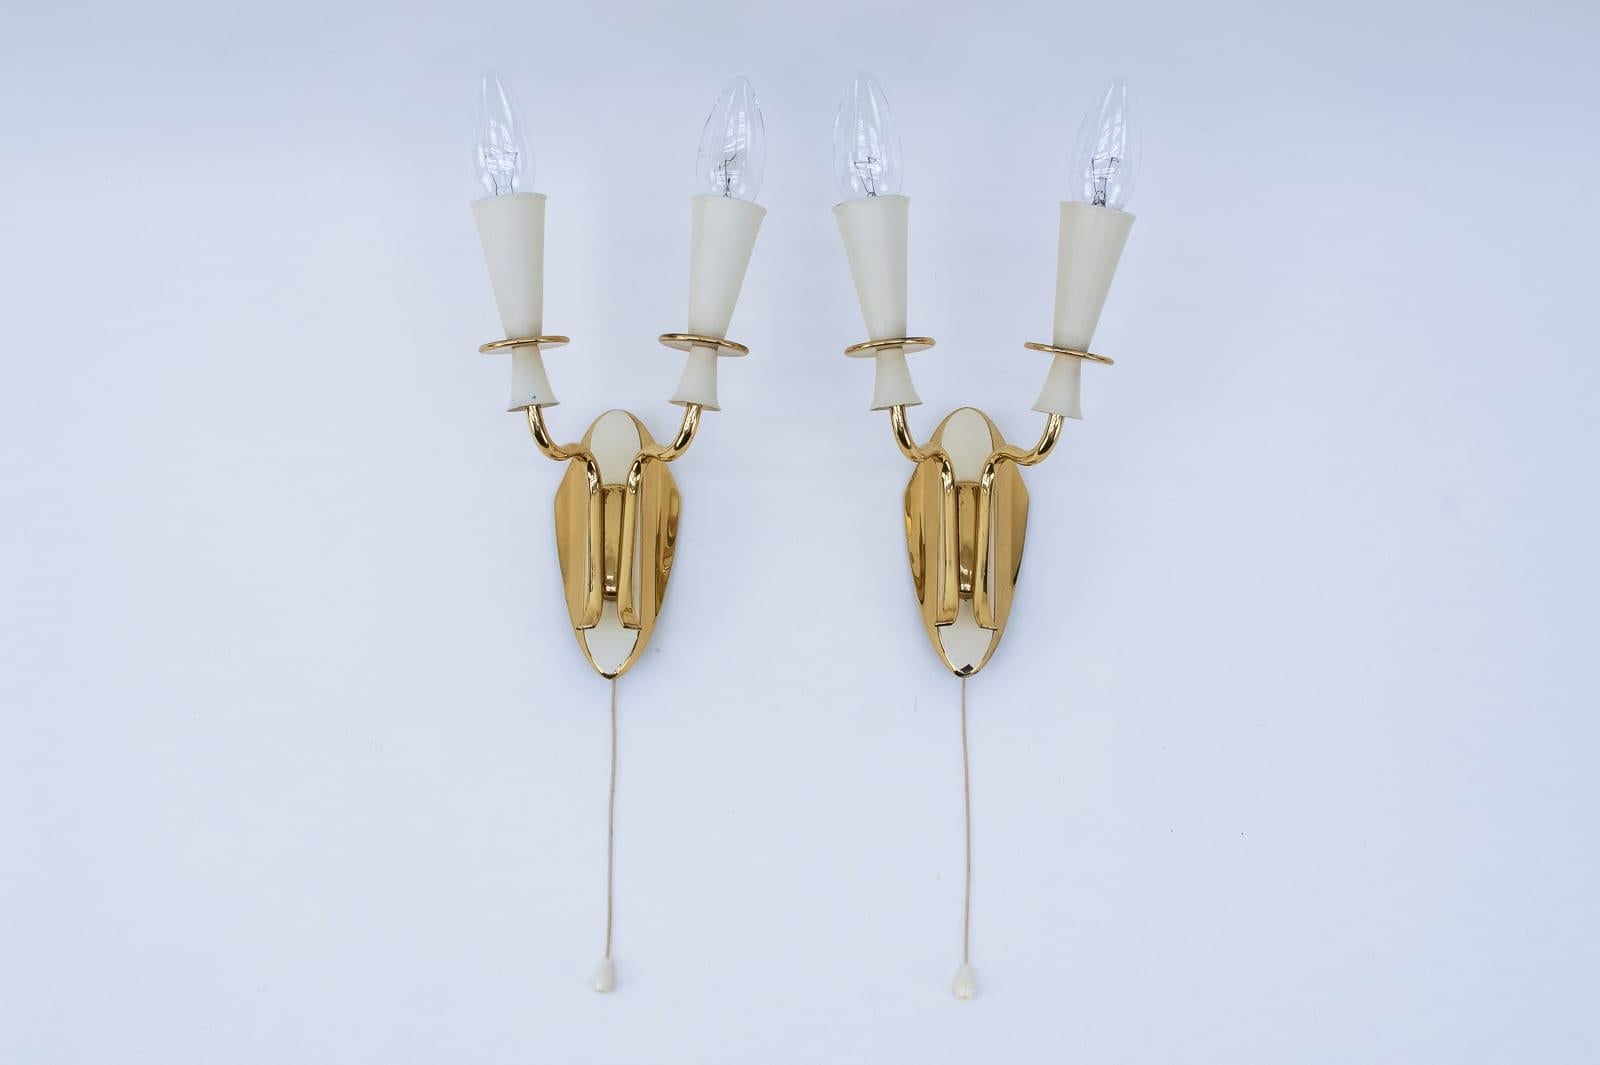 Mid-Century Modern Pair of Double Arm Brass Wall Lamps from the 1950s For Sale